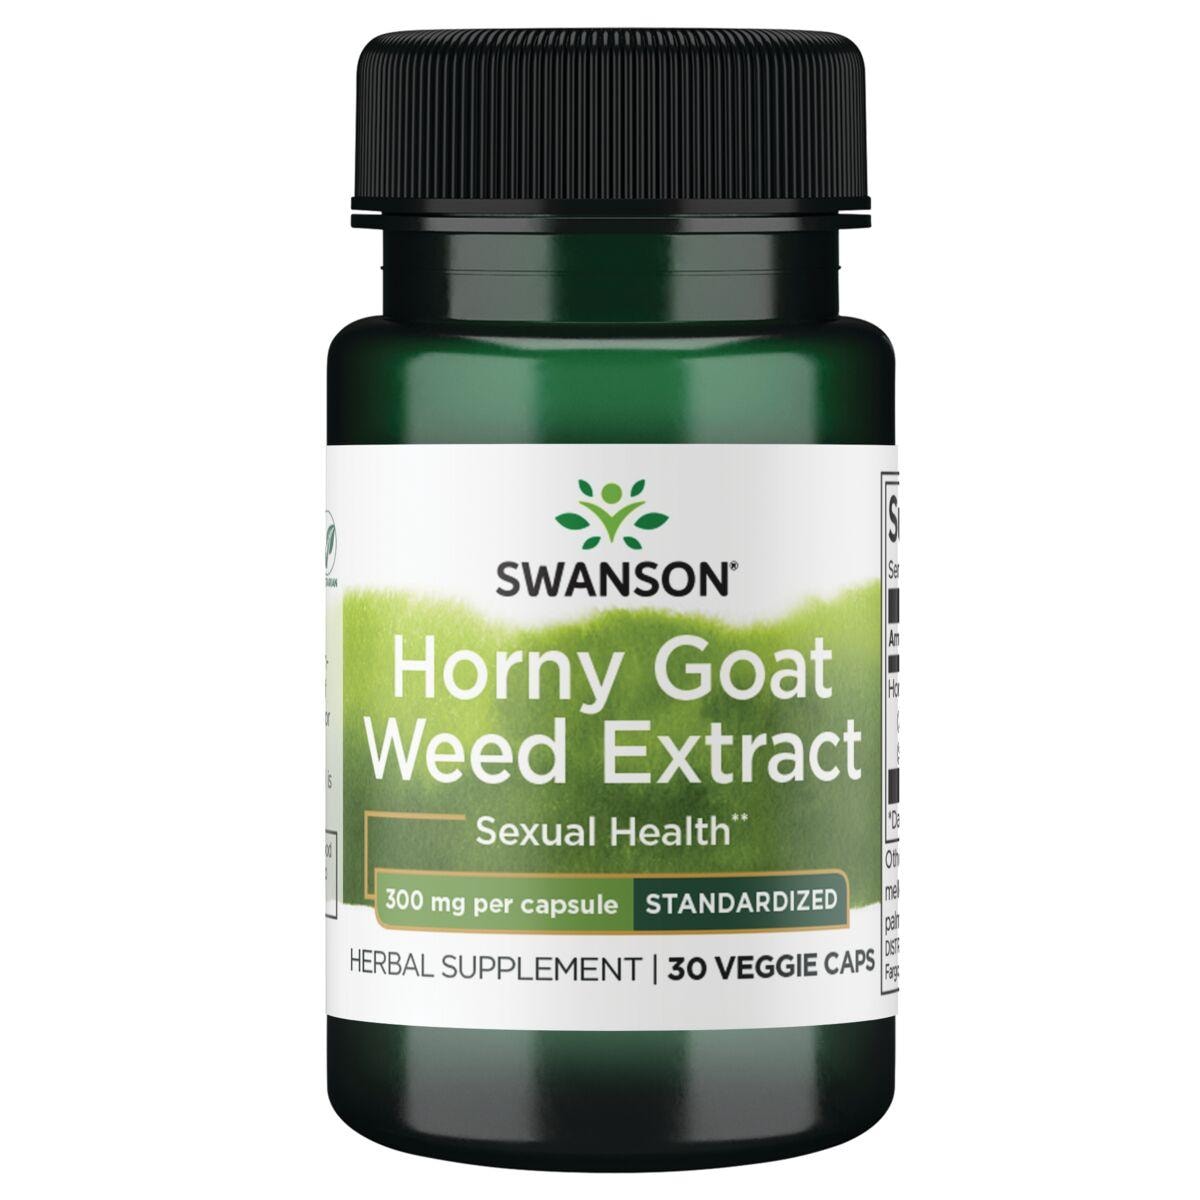 Swanson Superior Herbs Horny Goat Weed Extract - Standardized Vitamin | 300 mg | 30 Veg Caps | Sexual Health Support